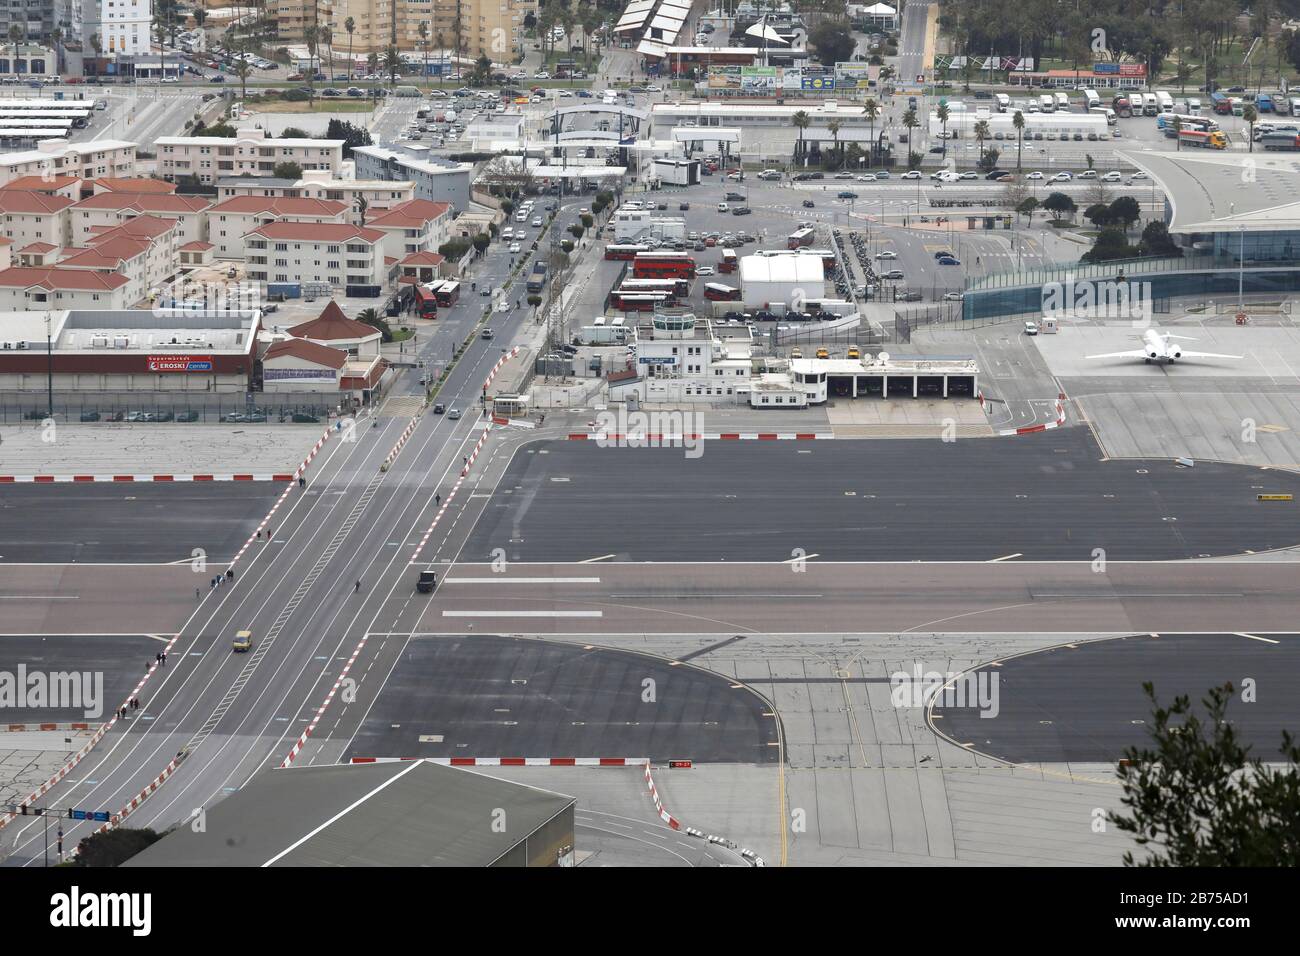 View to the airport of Gibraltar and the border crossing to Spain on 2019.02.14. Over the runway the main road from the border crossing to Gibraktar town runs. Gibraltar is waiting to see how Britain's future withdrawal from the European Union might affect Gibraltar. In the 2016 brexite vote, 96 percent of Gibraltarians voted in favour of Britain remaining in the EU. [automated translation] Stock Photo